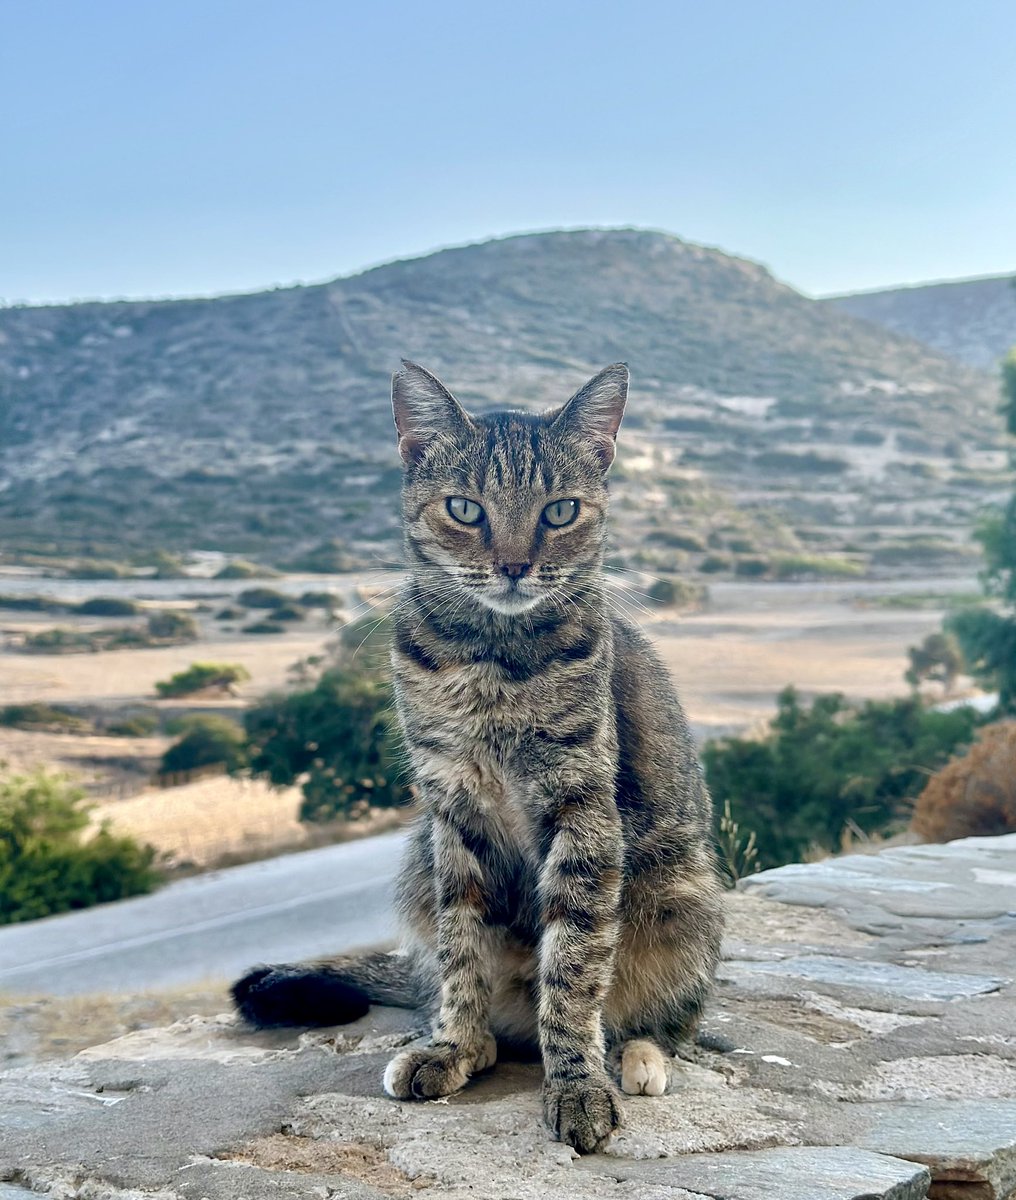 Say hello to Ziggy, a friendly spayed female who lives in the hilltop village cat colony and one of the Aegean cats we care for. You can help the #cats on Iraklia by donating now to fund life-saving medicines, neutering and food. Purr! #CatsAreFamily gofundme.com/f/cats-of-irak…